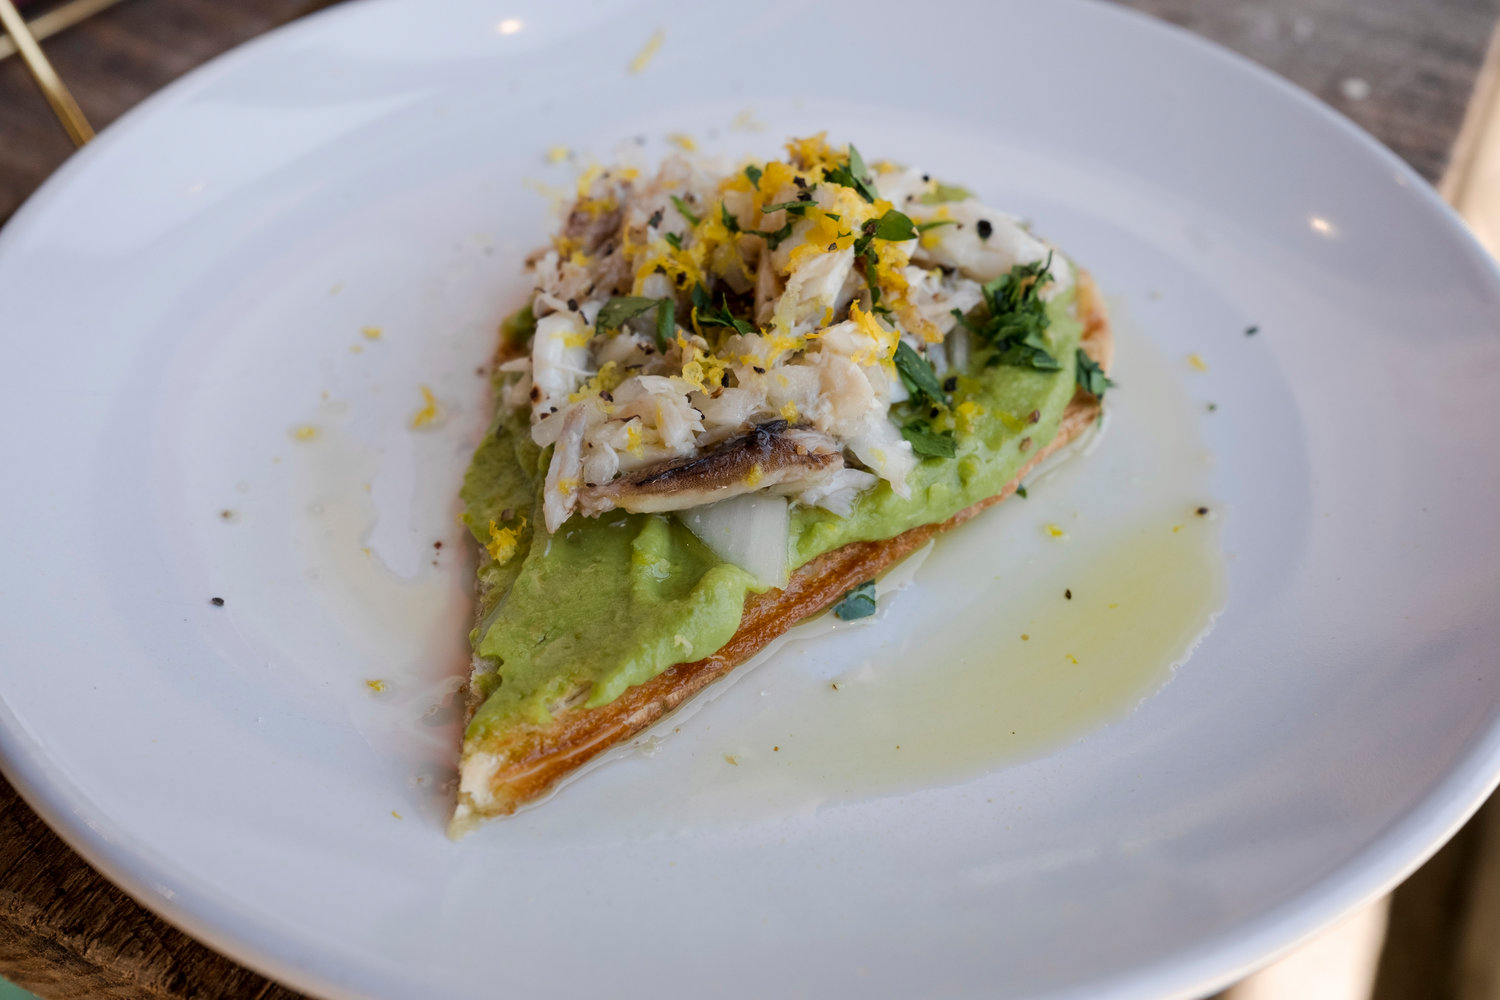 The West Indies Avocado Toast at Provision is the first dish on the Taste of Fairhope Tour. While guests sample the delicious dish they also learn the local history behind West Indies Salad.